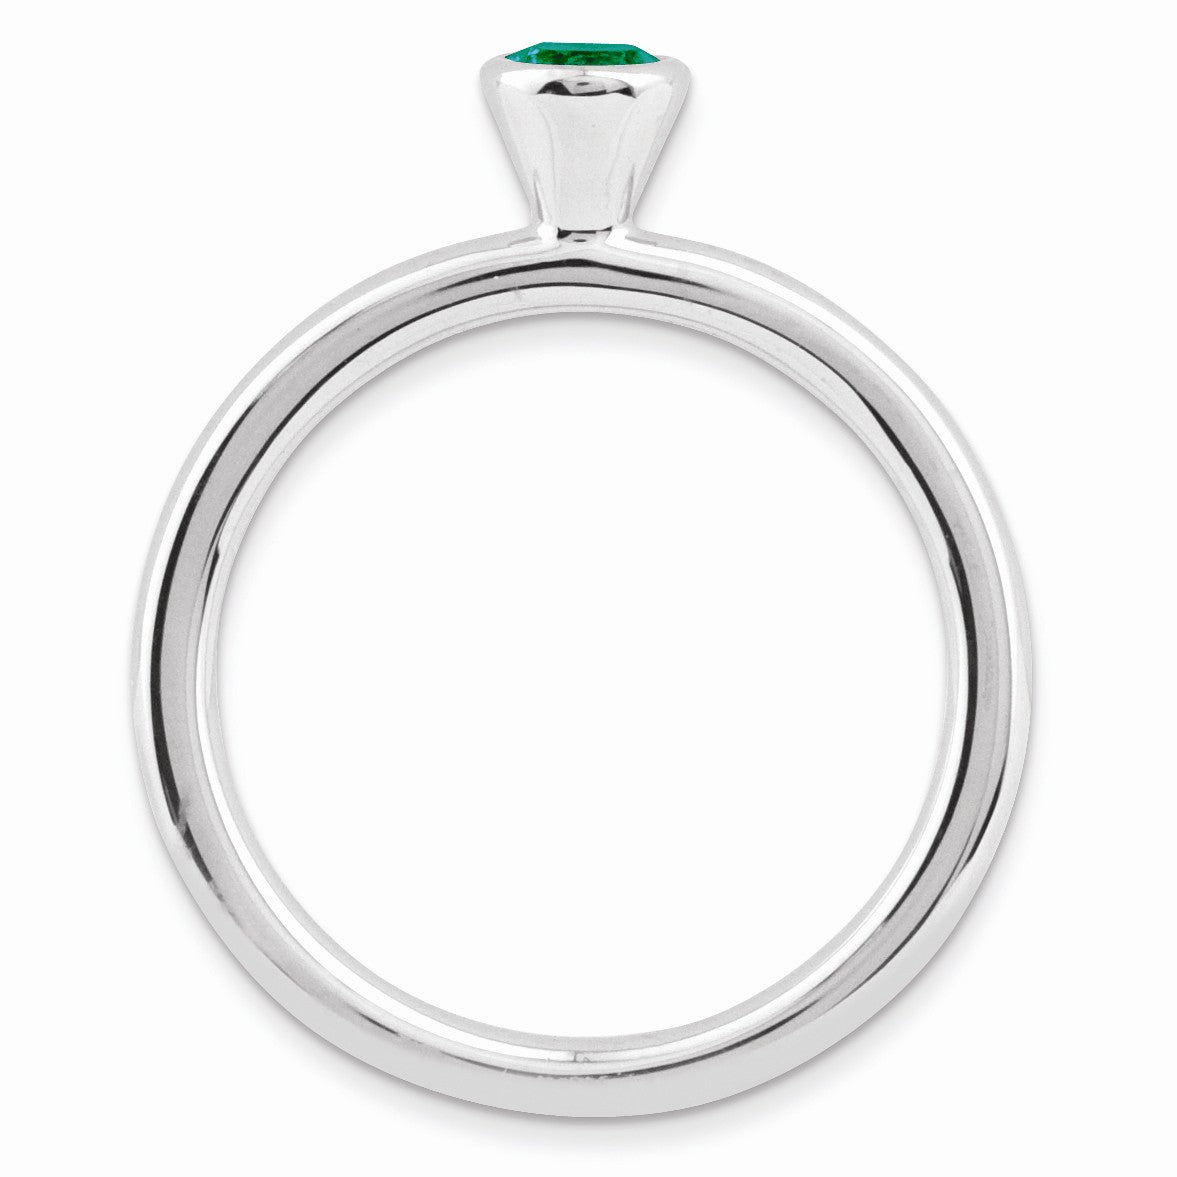 Alternate view of the Stackable High Profile 4mm Created Emerald Silver Ring by The Black Bow Jewelry Co.